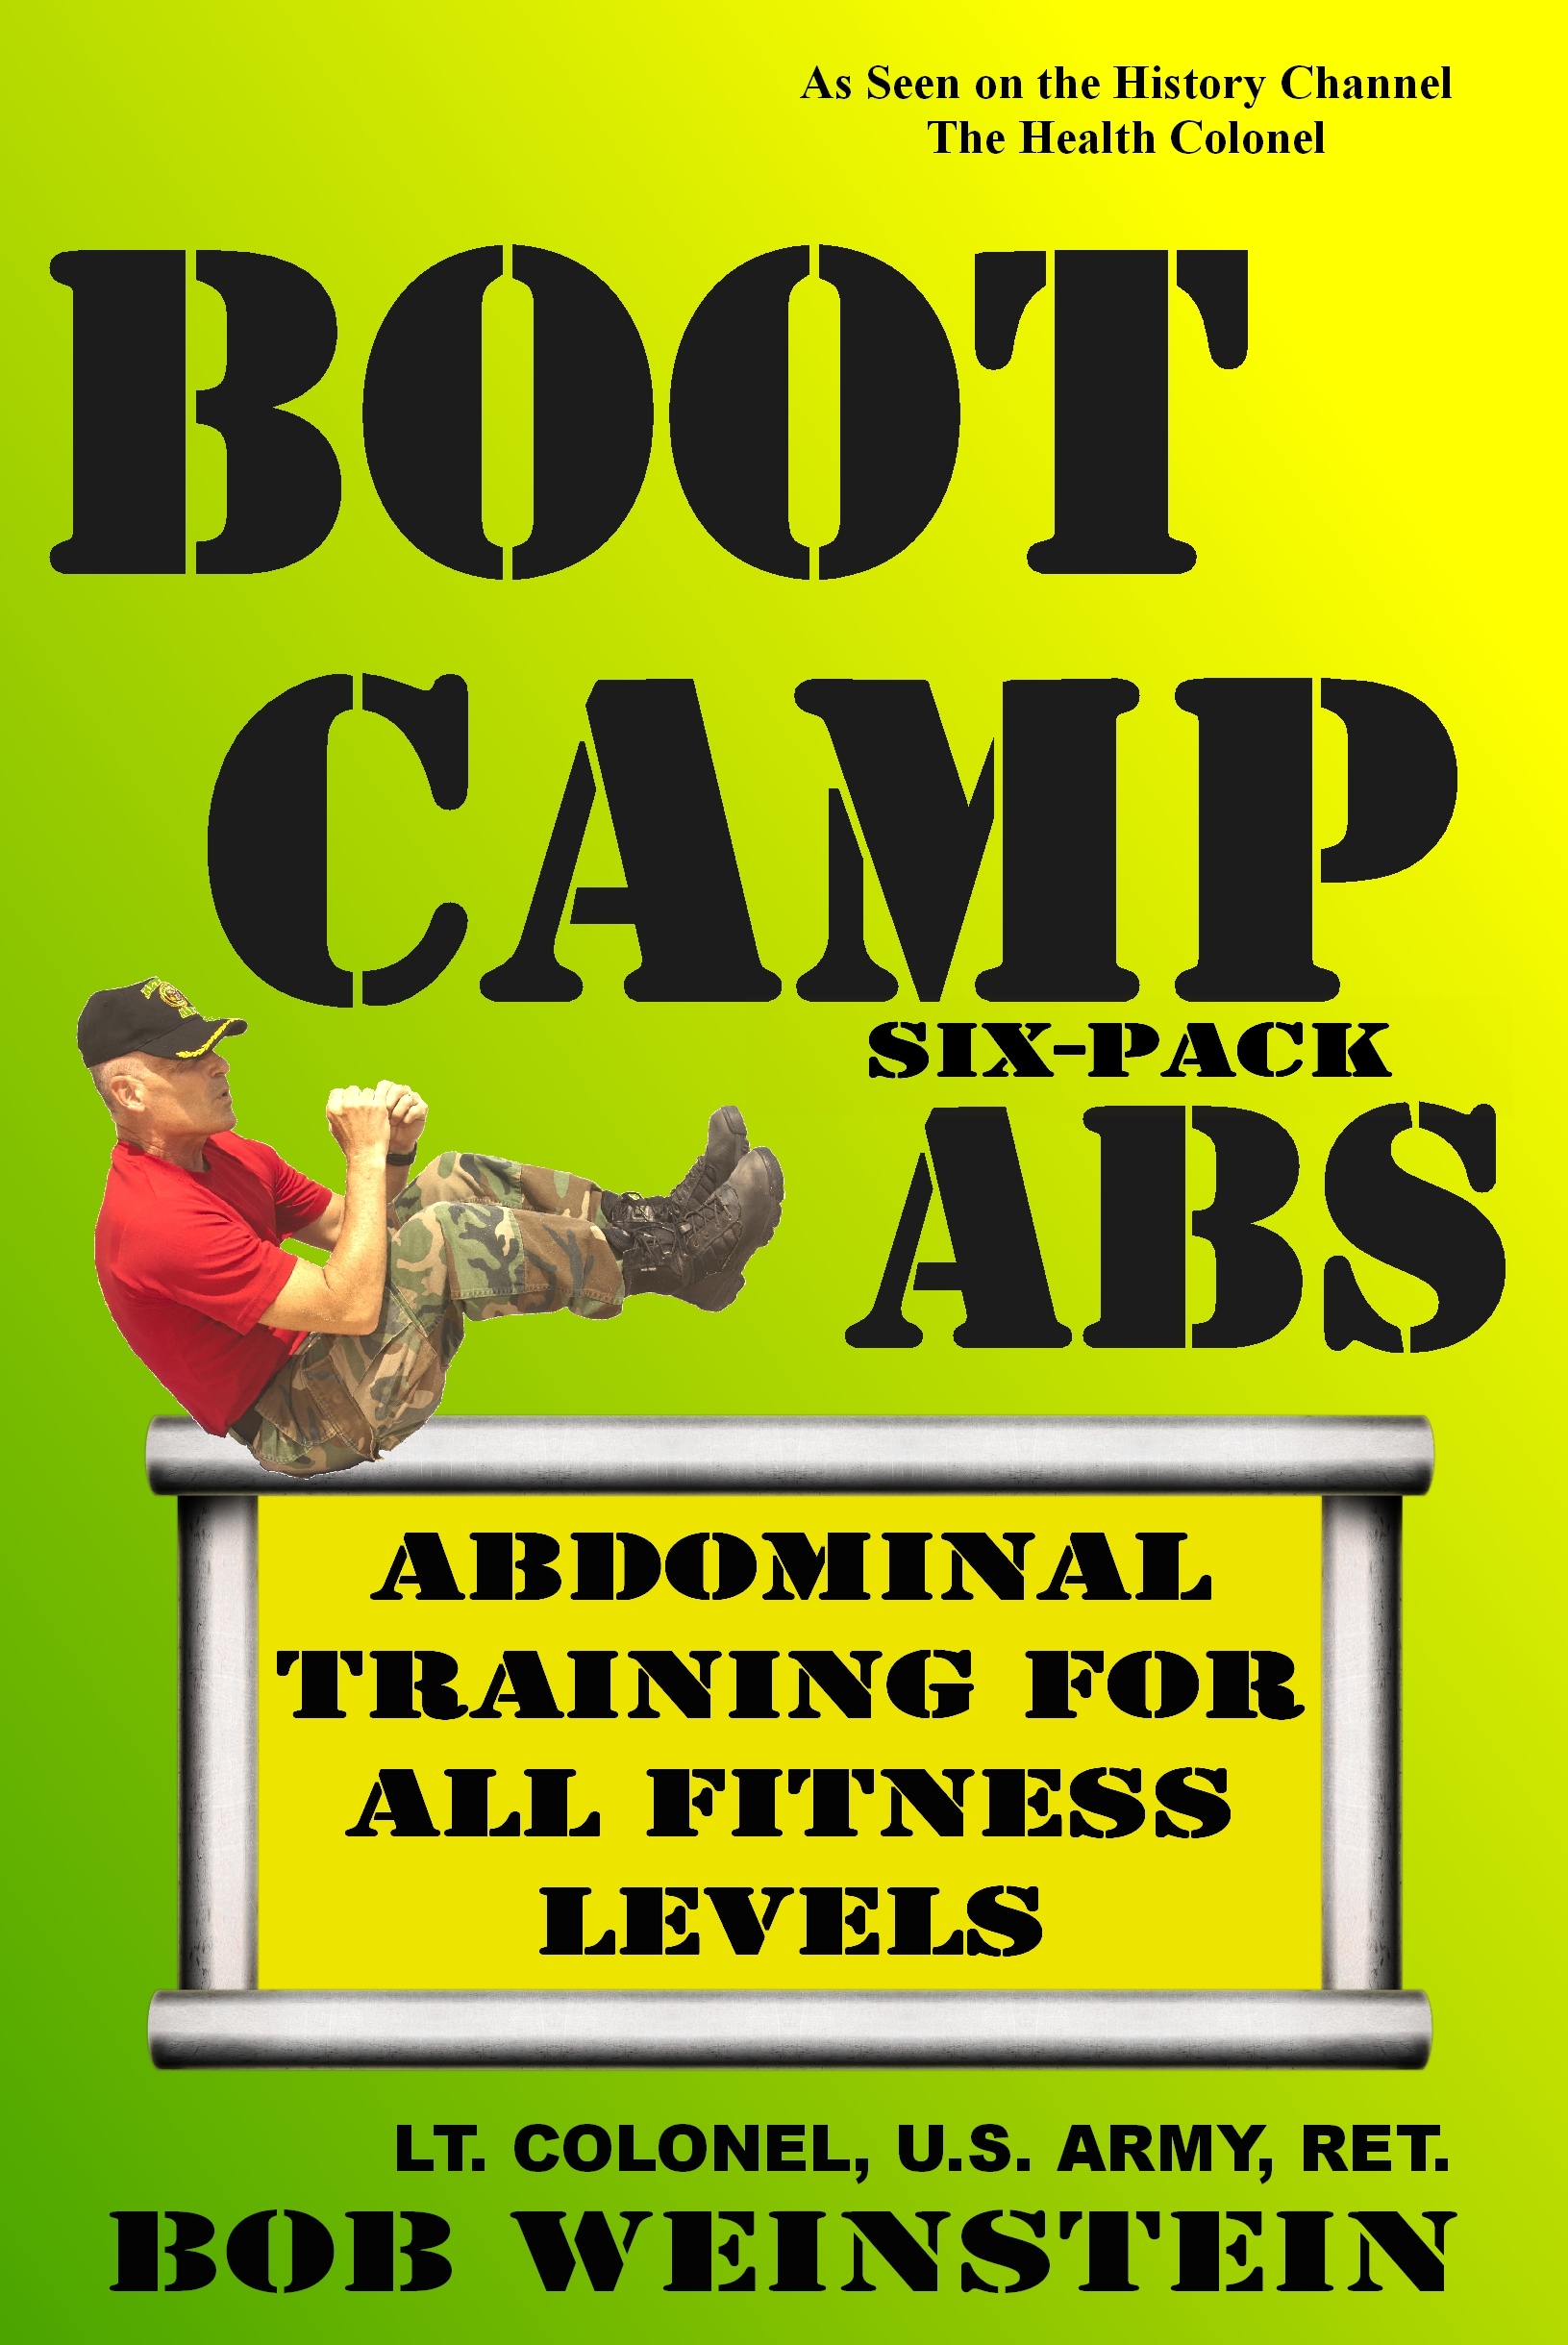 Colonel Publishes Boot Camp Six Pack Abs